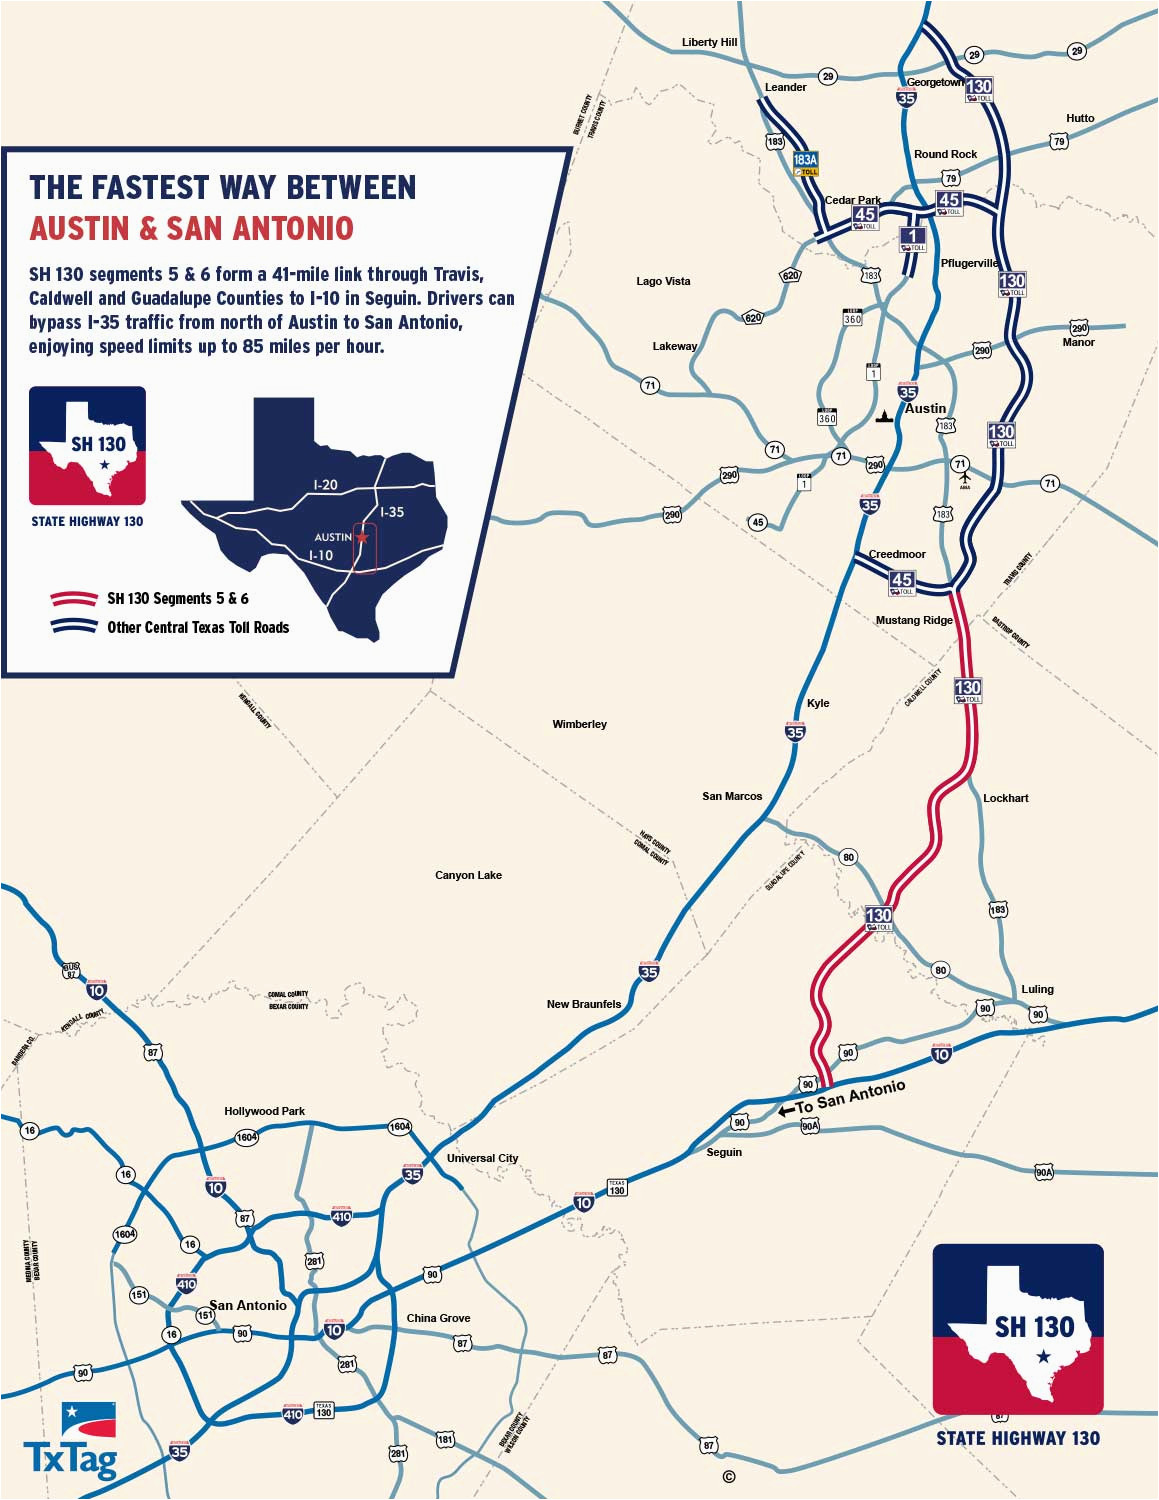 state highway 130 maps sh 130 the fastest way between austin san